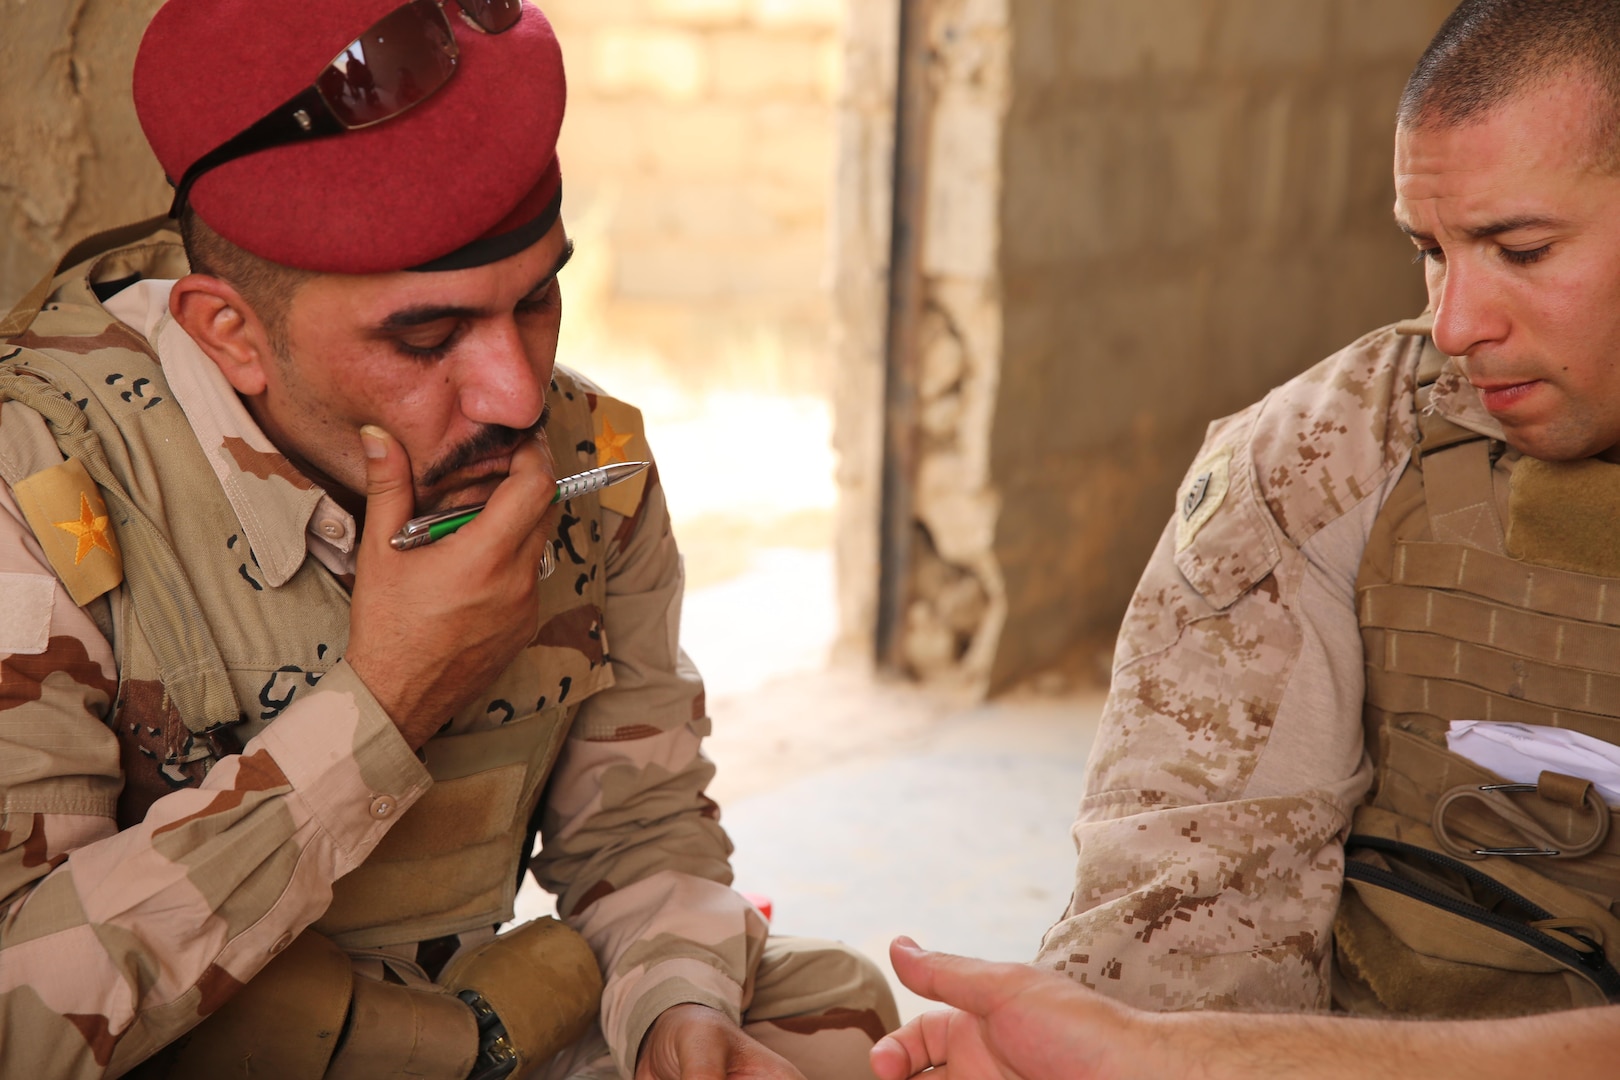 U.S. Marine Corps Gunnery Sgt. Ryan Kirkham, the combined anti-armor team platoon sergeant attached to Task Force Al Asad with 1st Battalion, 7th Marine Regiment, Special Purpose Marine Air-Ground Task Force-Crisis Response-Central Command, conducts a de-brief with Iraqi officer of the 7th Iraqi Infantry Division at Al Asad Air Base, Iraq, July 7, 2017. These Marines are part of the Task Force’s coalition security force team in charge of providing security to the base and personnel onboard. Task Force Al Asad’s mission is to advise and assist and build partner capacity with the Iraqi Security Forces in Al Anbar province in support of Combined Joint Task Force-Operation Inherent Resolve, the global coalition to defeat ISIS in Iraq and Syria. (U.S. Marine Corps photo by 1st Lt. Dave Williams)